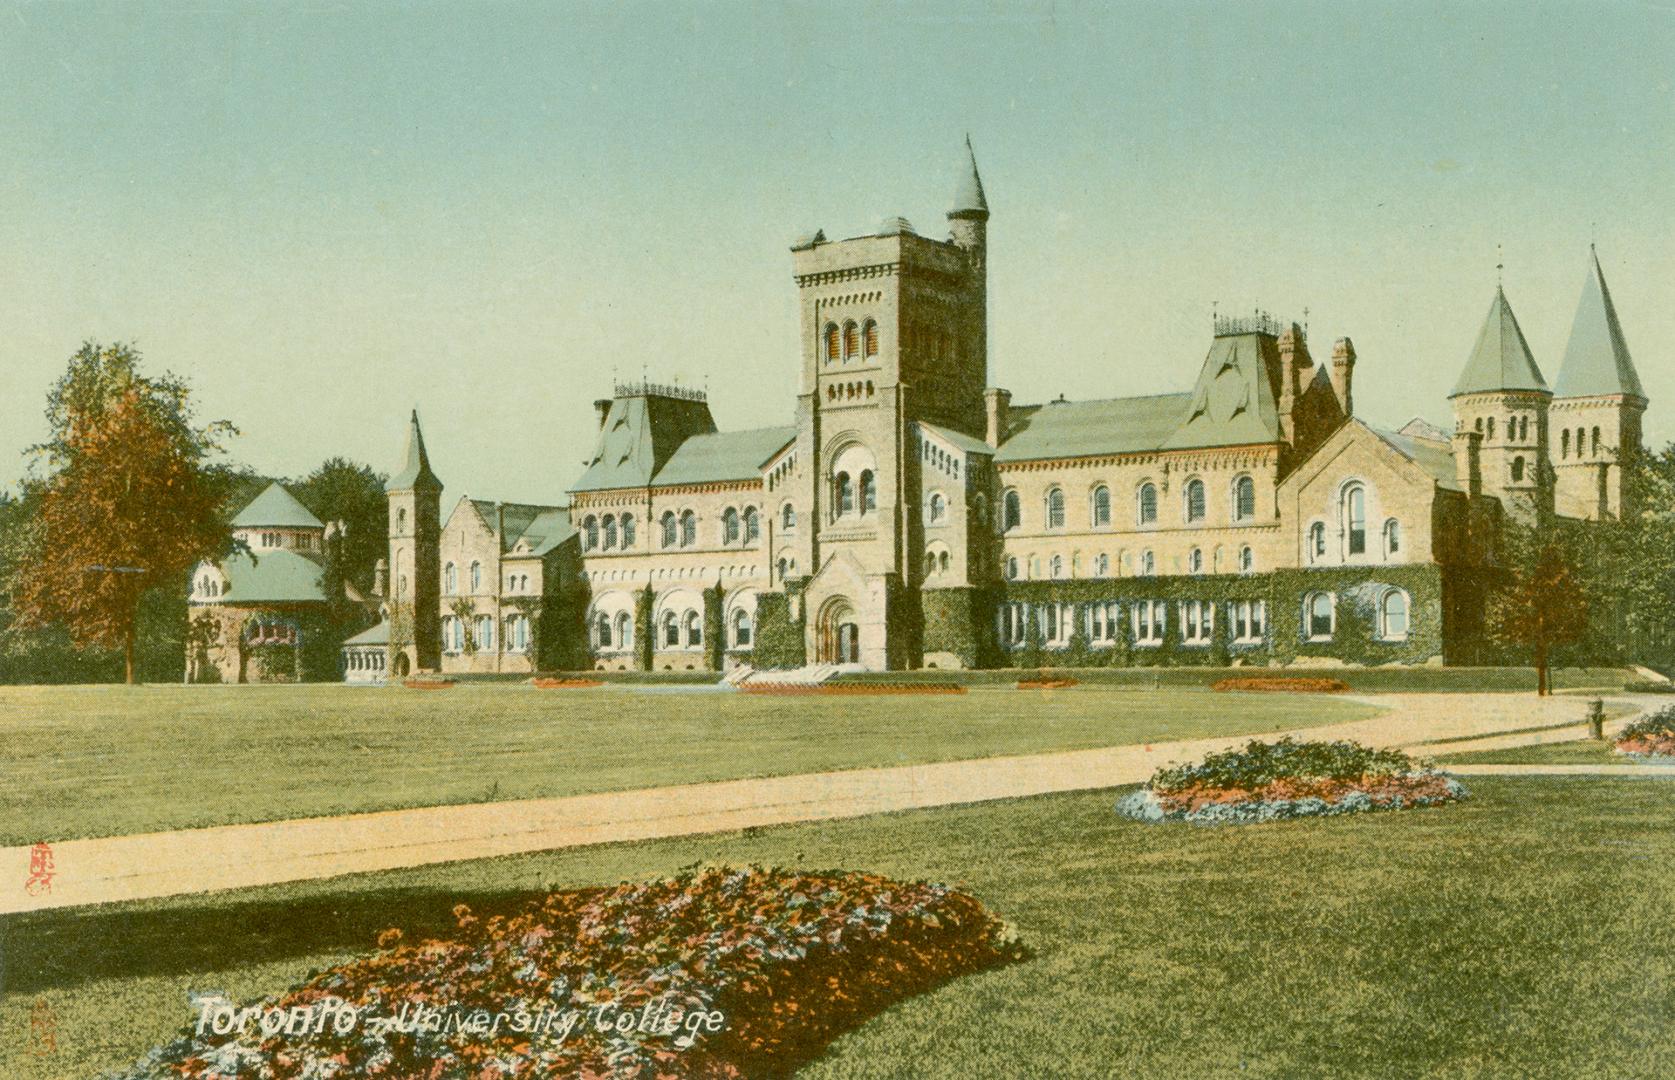 Colorized photograph of a very large stone building with many towers.